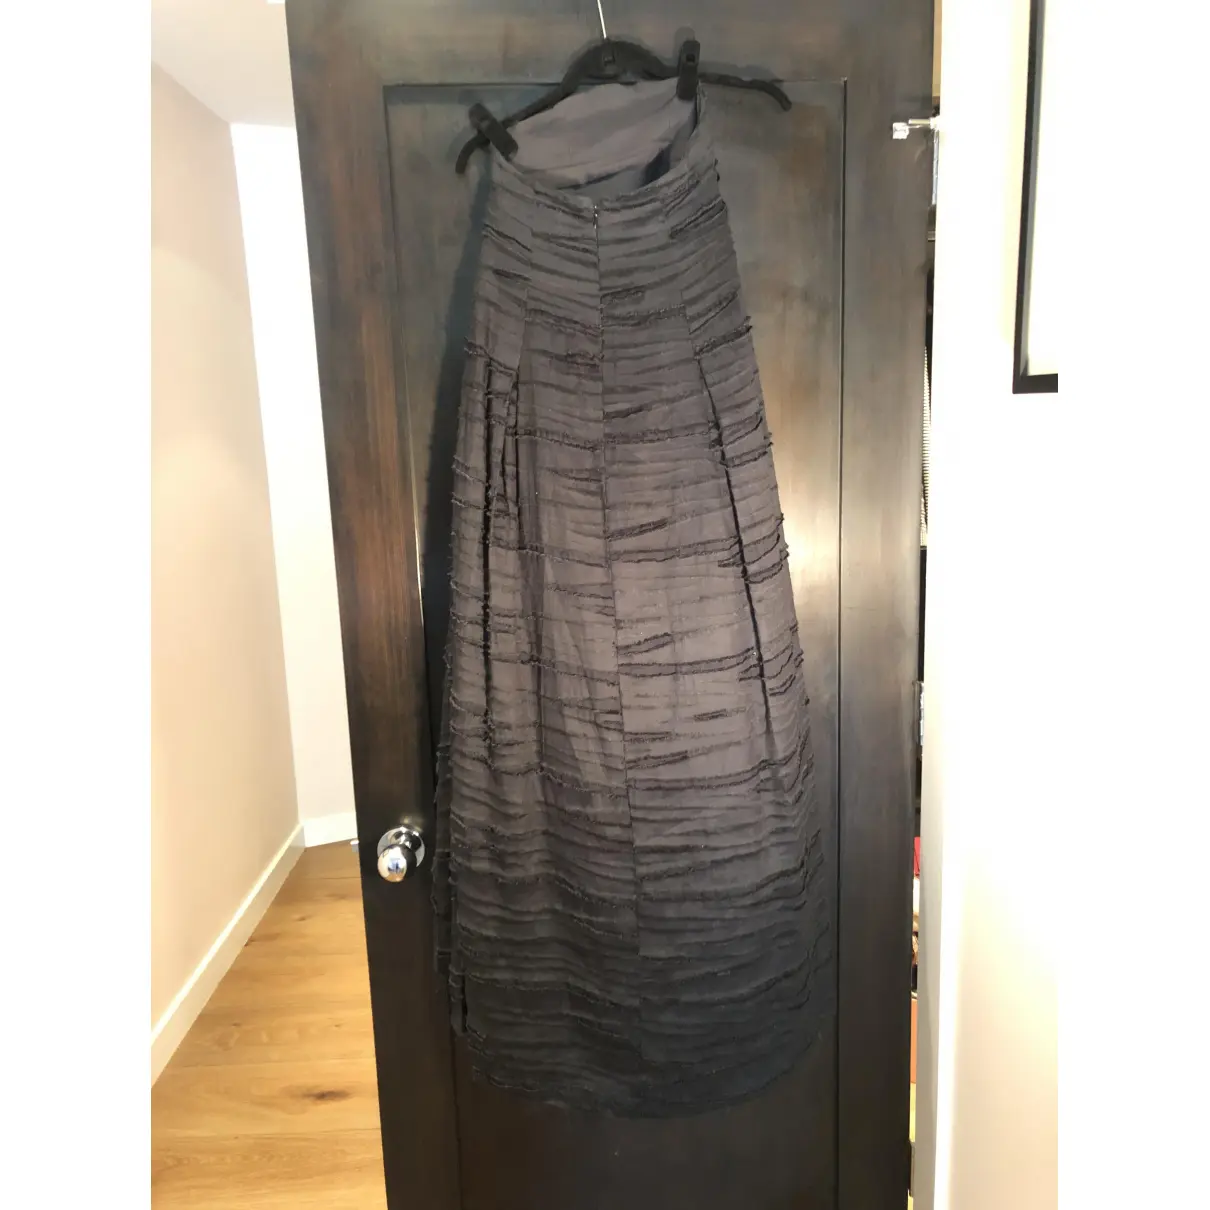 Buy H&M Conscious Exclusive Maxi skirt online